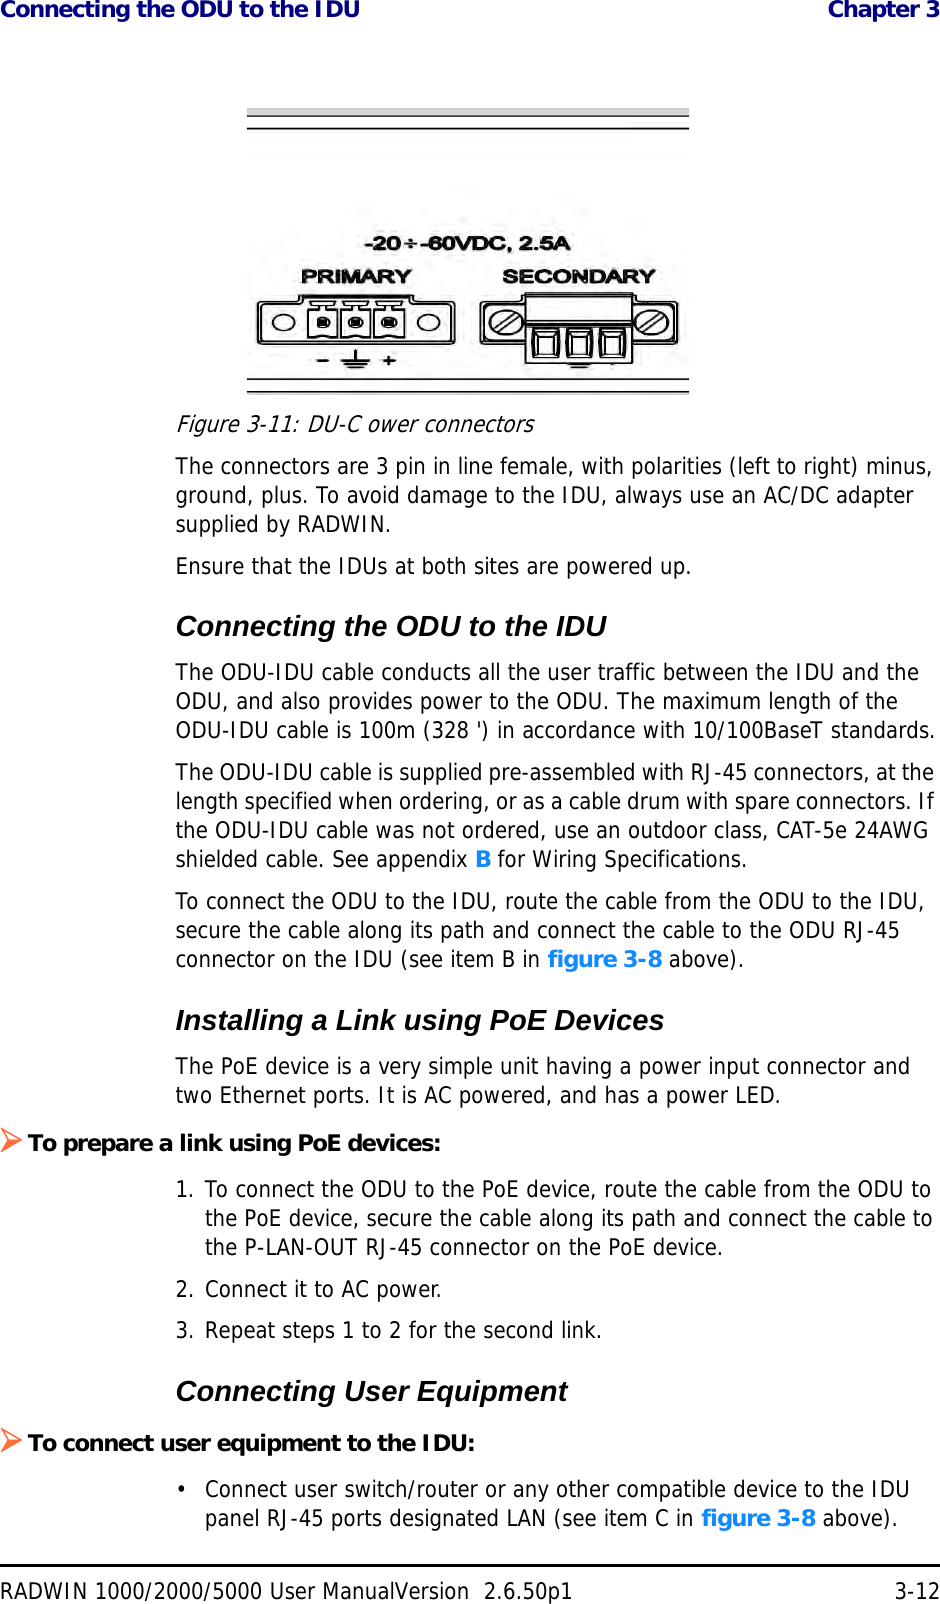 Connecting the ODU to the IDU  Chapter 3RADWIN 1000/2000/5000 User ManualVersion  2.6.50p1 3-12Figure 3-11: DU-C ower connectorsThe connectors are 3 pin in line female, with polarities (left to right) minus, ground, plus. To avoid damage to the IDU, always use an AC/DC adapter supplied by RADWIN.Ensure that the IDUs at both sites are powered up.Connecting the ODU to the IDUThe ODU-IDU cable conducts all the user traffic between the IDU and the ODU, and also provides power to the ODU. The maximum length of the ODU-IDU cable is 100m (328 &apos;) in accordance with 10/100BaseT standards.The ODU-IDU cable is supplied pre-assembled with RJ-45 connectors, at the length specified when ordering, or as a cable drum with spare connectors. If the ODU-IDU cable was not ordered, use an outdoor class, CAT-5e 24AWG shielded cable. See appendix B for Wiring Specifications.To connect the ODU to the IDU, route the cable from the ODU to the IDU, secure the cable along its path and connect the cable to the ODU RJ-45 connector on the IDU (see item B in figure 3-8 above).Installing a Link using PoE DevicesThe PoE device is a very simple unit having a power input connector and two Ethernet ports. It is AC powered, and has a power LED.To prepare a link using PoE devices:1. To connect the ODU to the PoE device, route the cable from the ODU to the PoE device, secure the cable along its path and connect the cable to the P-LAN-OUT RJ-45 connector on the PoE device.2. Connect it to AC power.3. Repeat steps 1 to 2 for the second link.Connecting User EquipmentTo connect user equipment to the IDU:• Connect user switch/router or any other compatible device to the IDU panel RJ-45 ports designated LAN (see item C in figure 3-8 above).